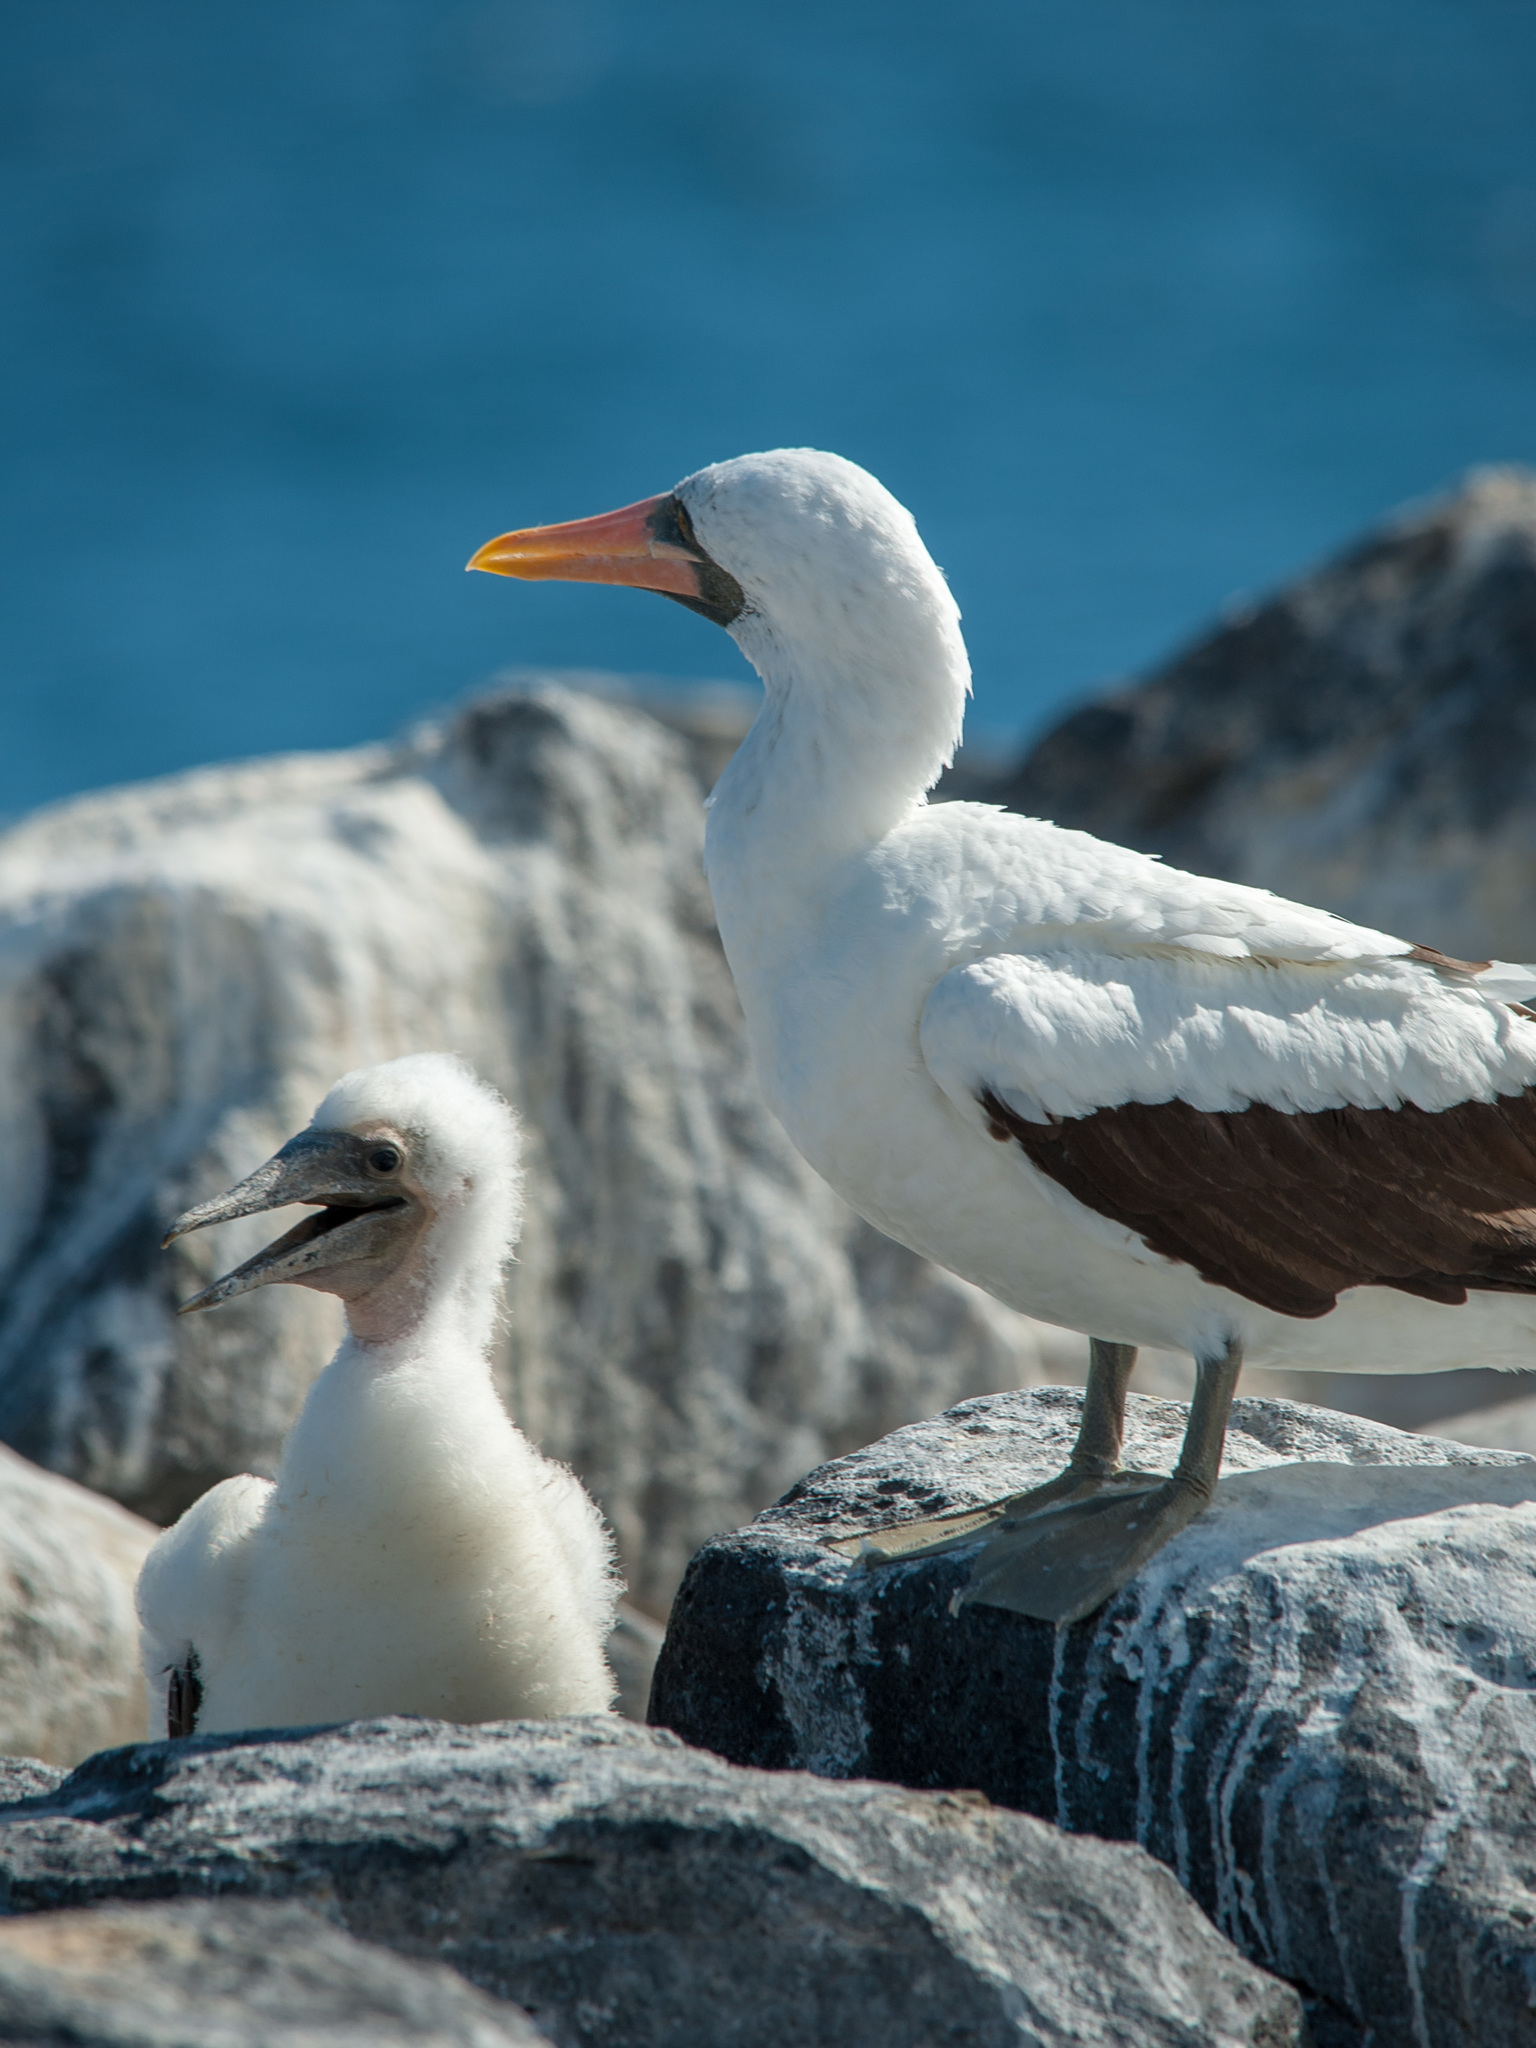 A parent Nazca Booby bird (with bright orange bill) stands on a rock over its downy-feathered chick, near sea-blue water.